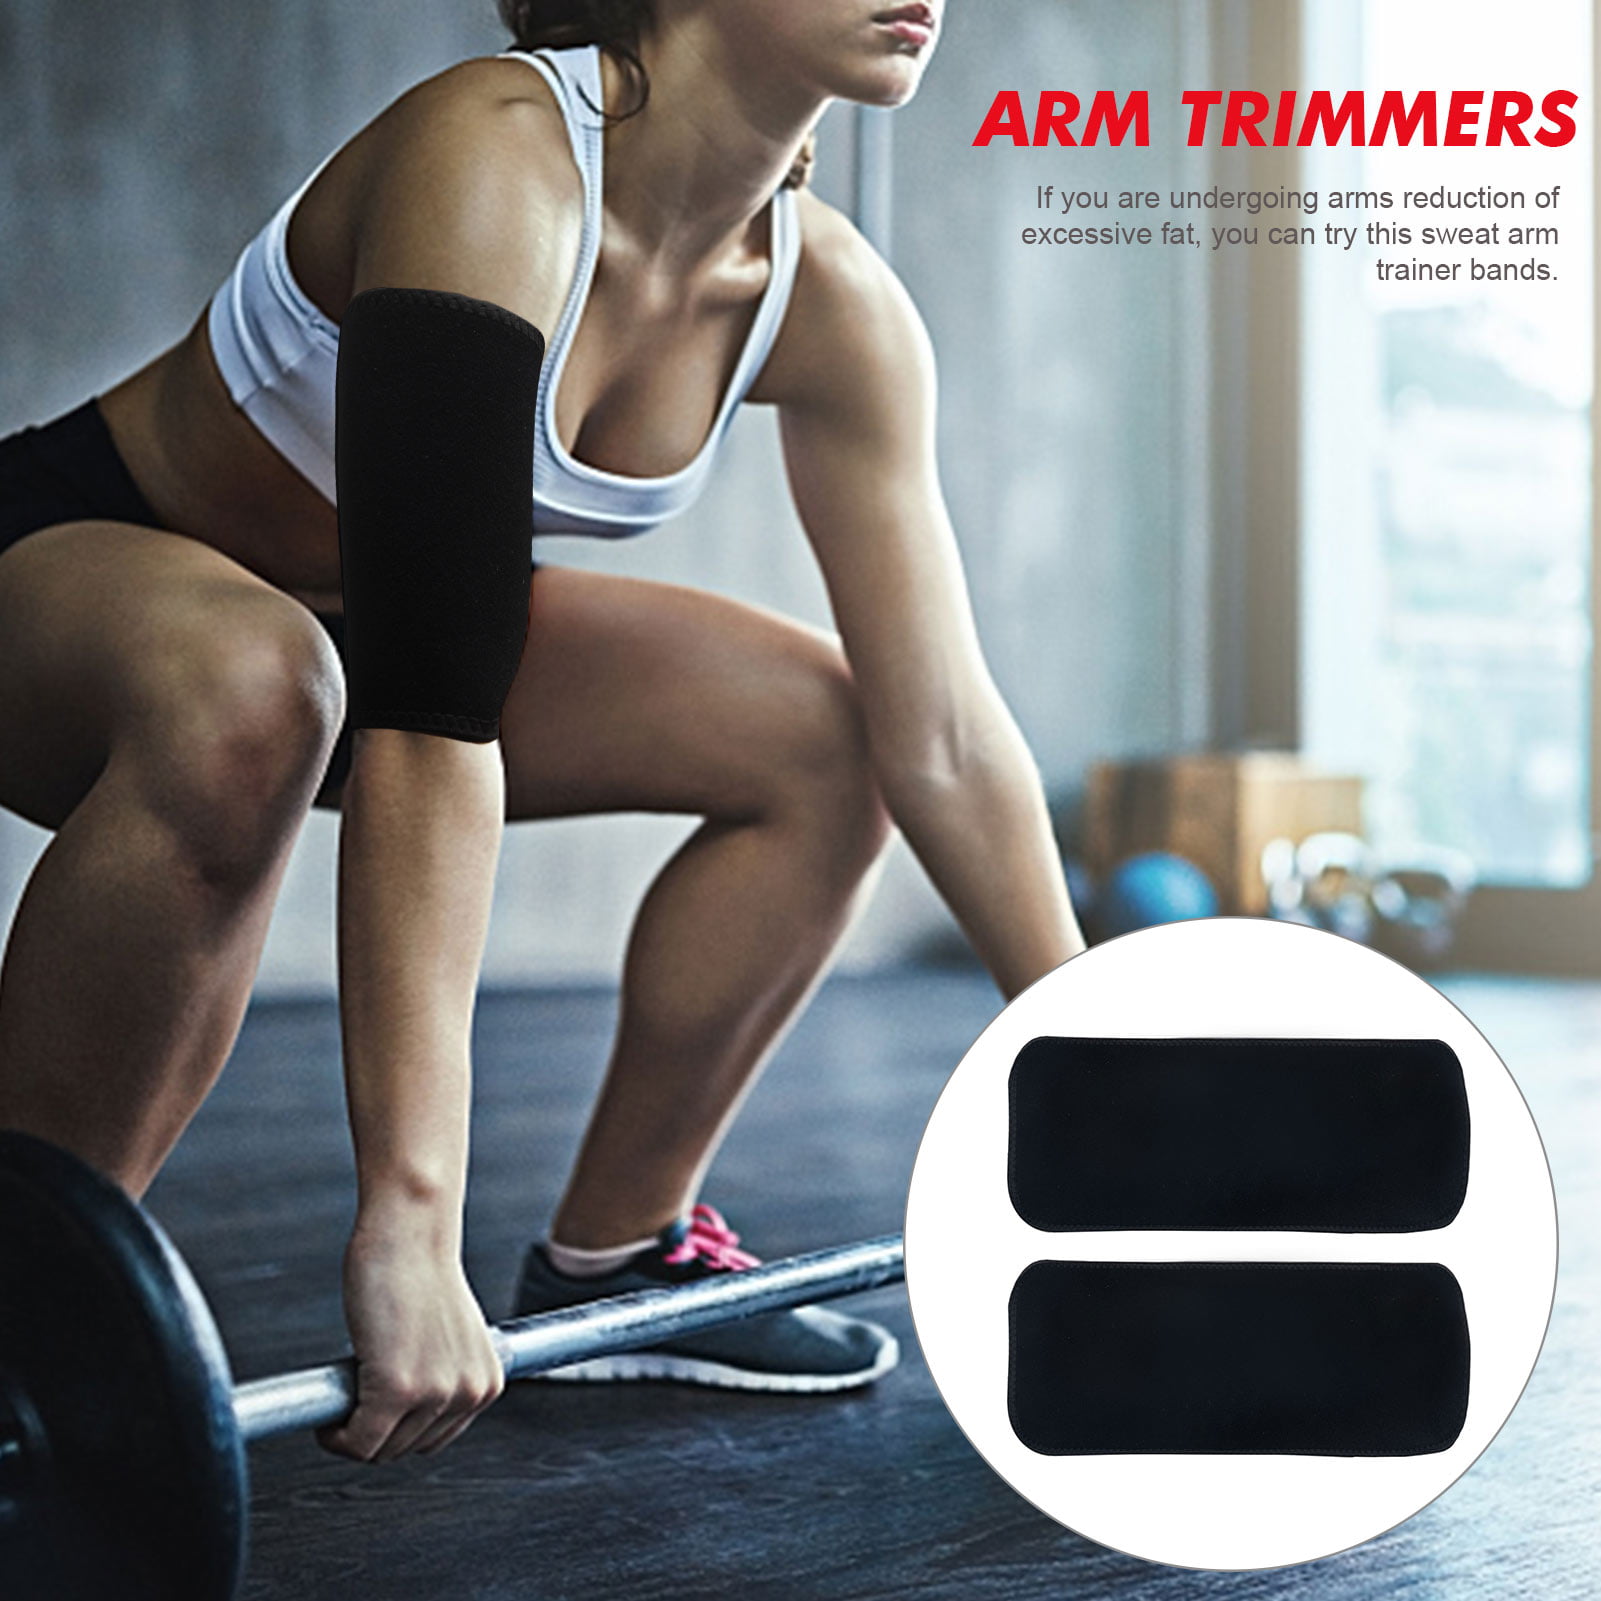 Arm Trimmers Body Exercise Wraps Fat Burner Sauna Sweat Band Slimming Shaper Gym 